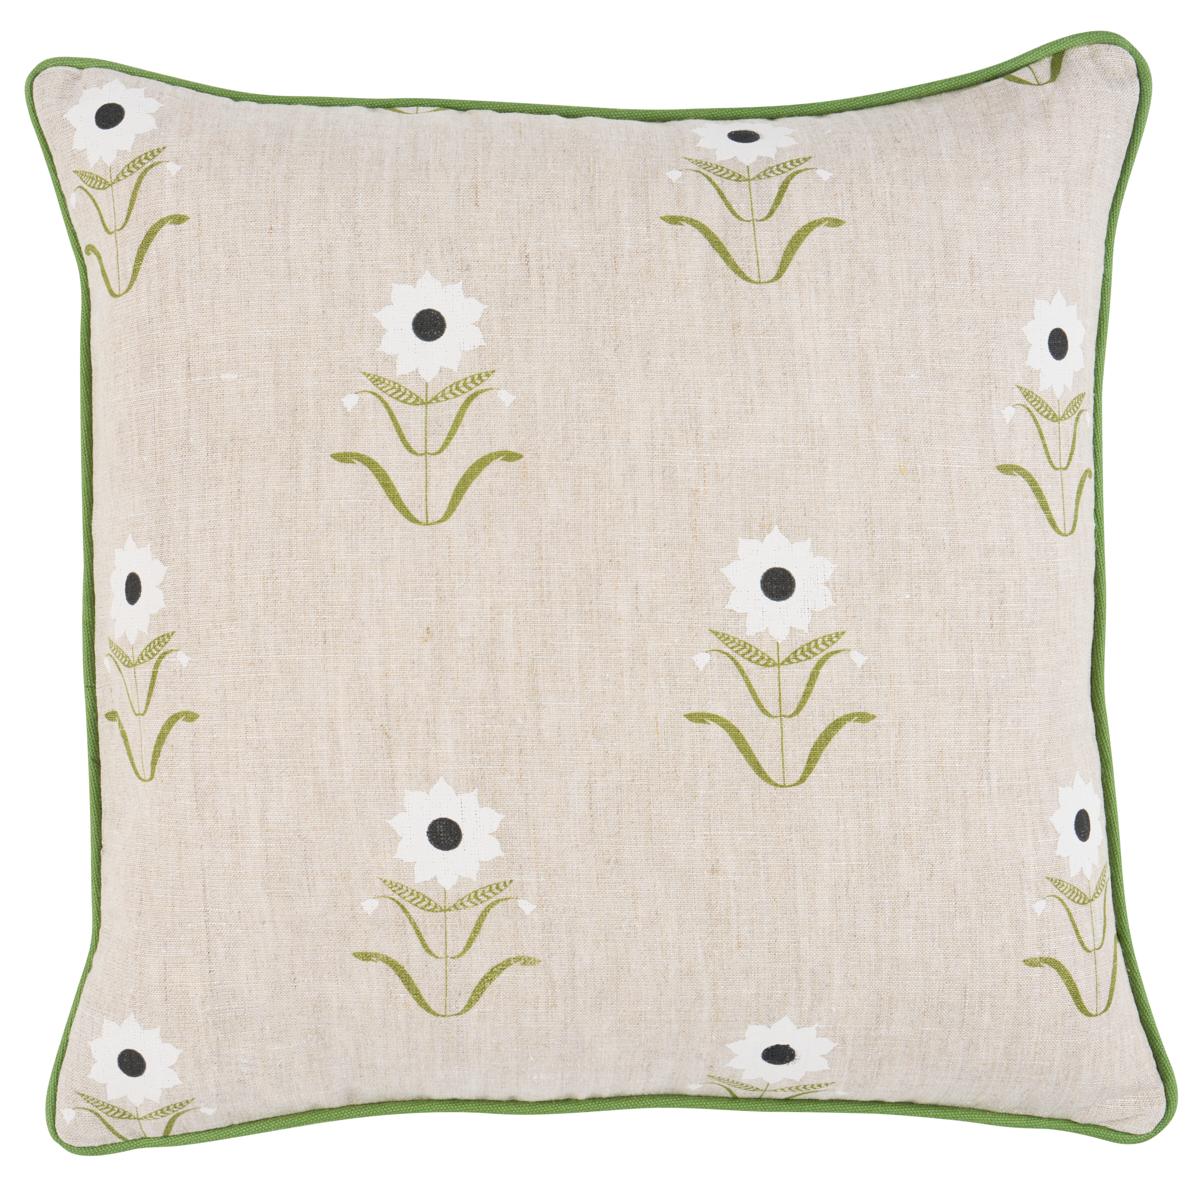 Forget Me Nots Pillow in White on Linen 16 x 16" For Sale